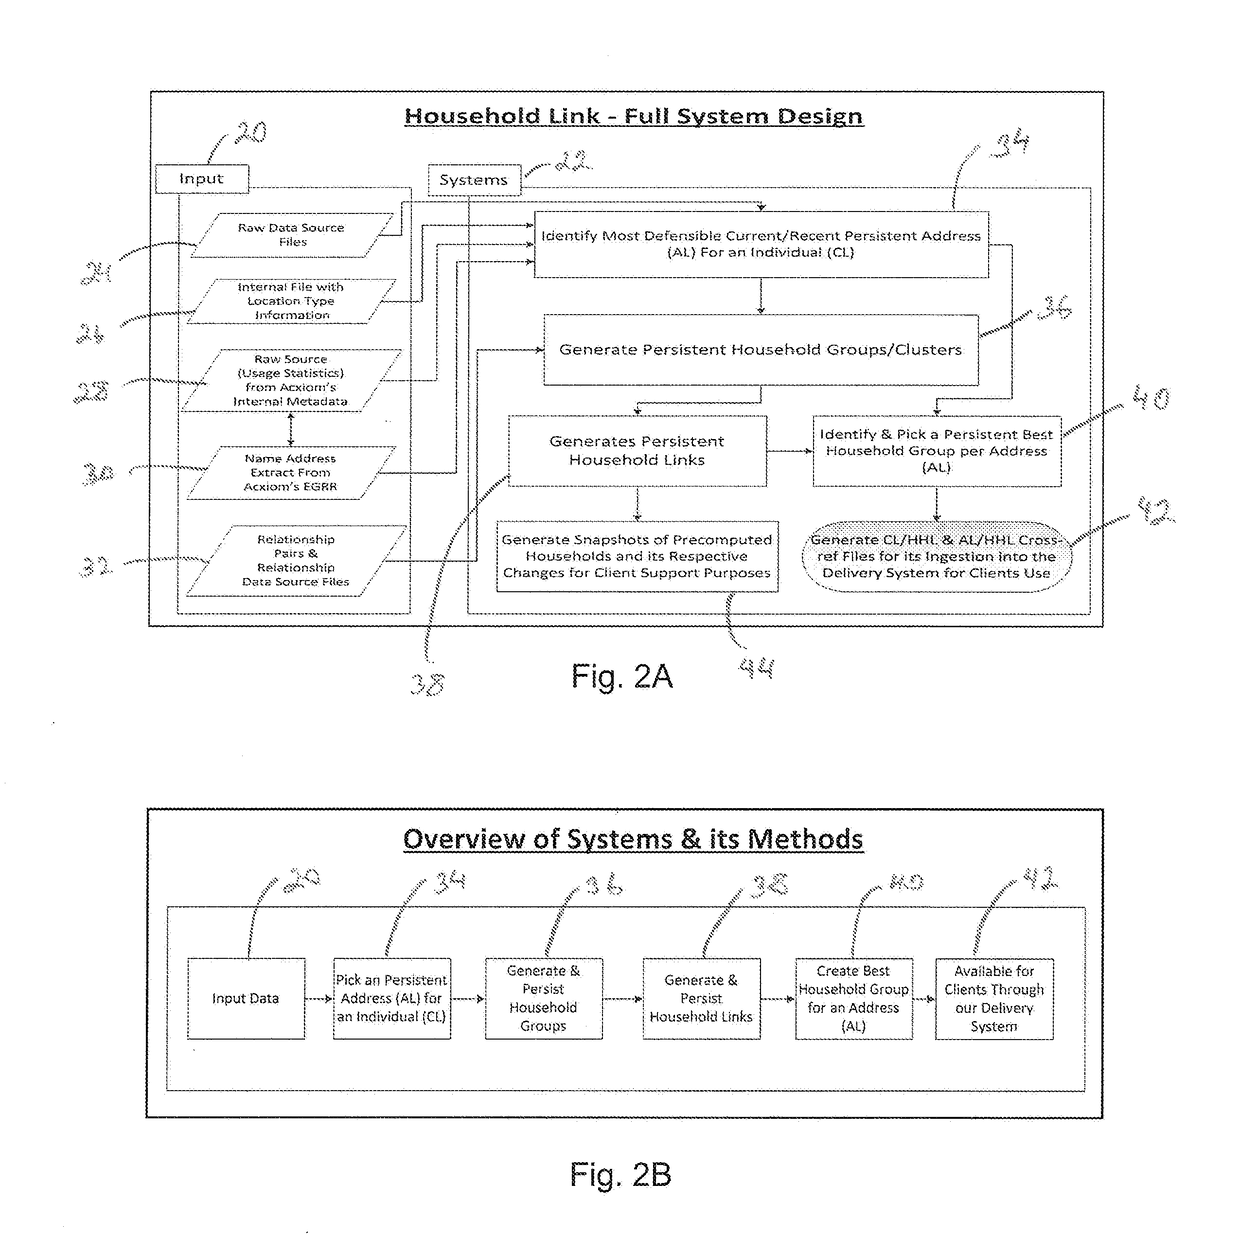 System and Method for Improving Computational Efficiency of Consumer Databases Using Household Links